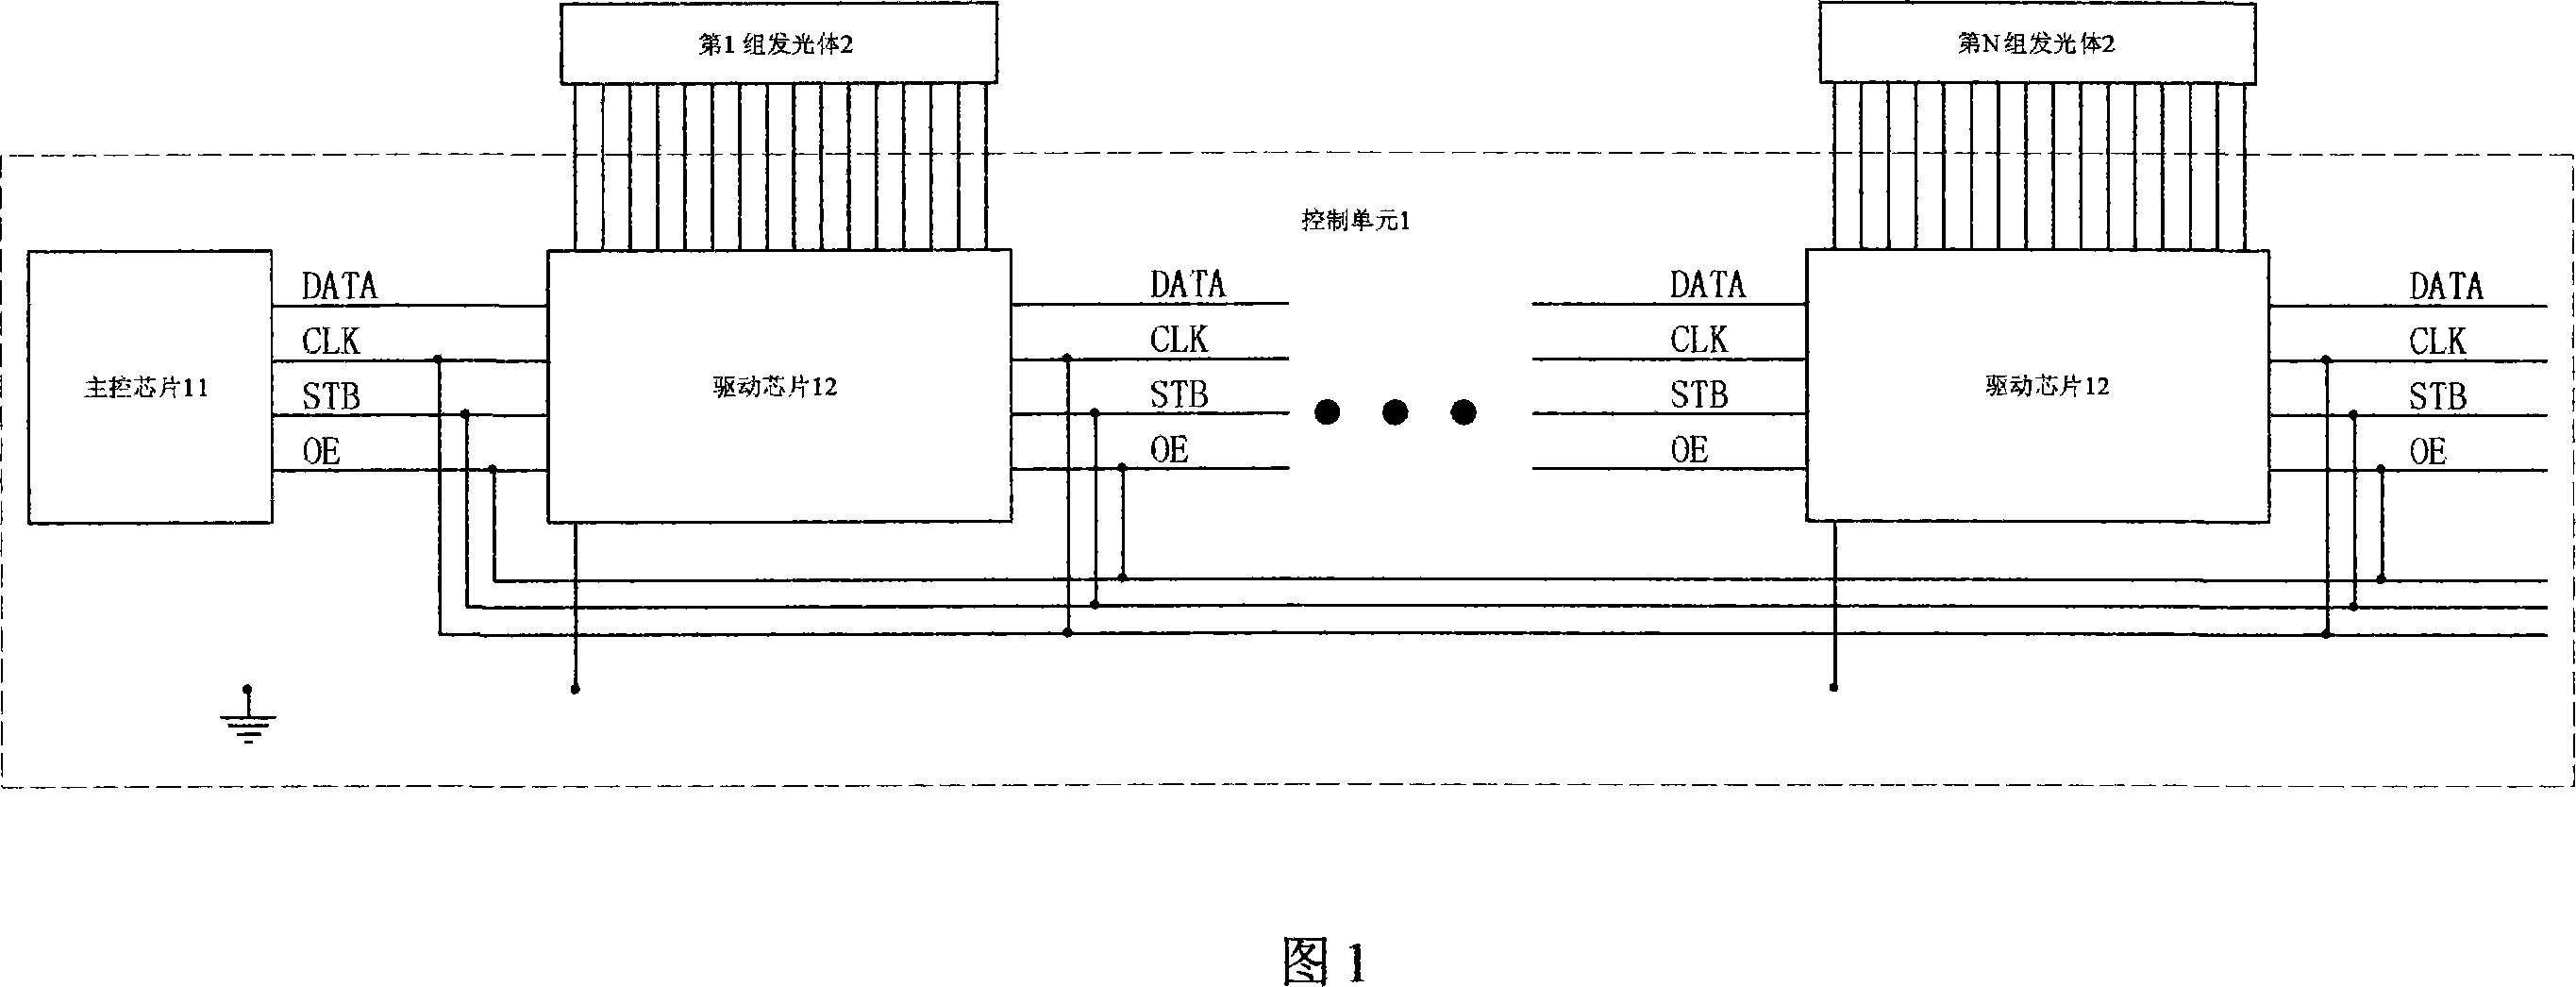 1/3 time division LED display control technology and corresponding control system